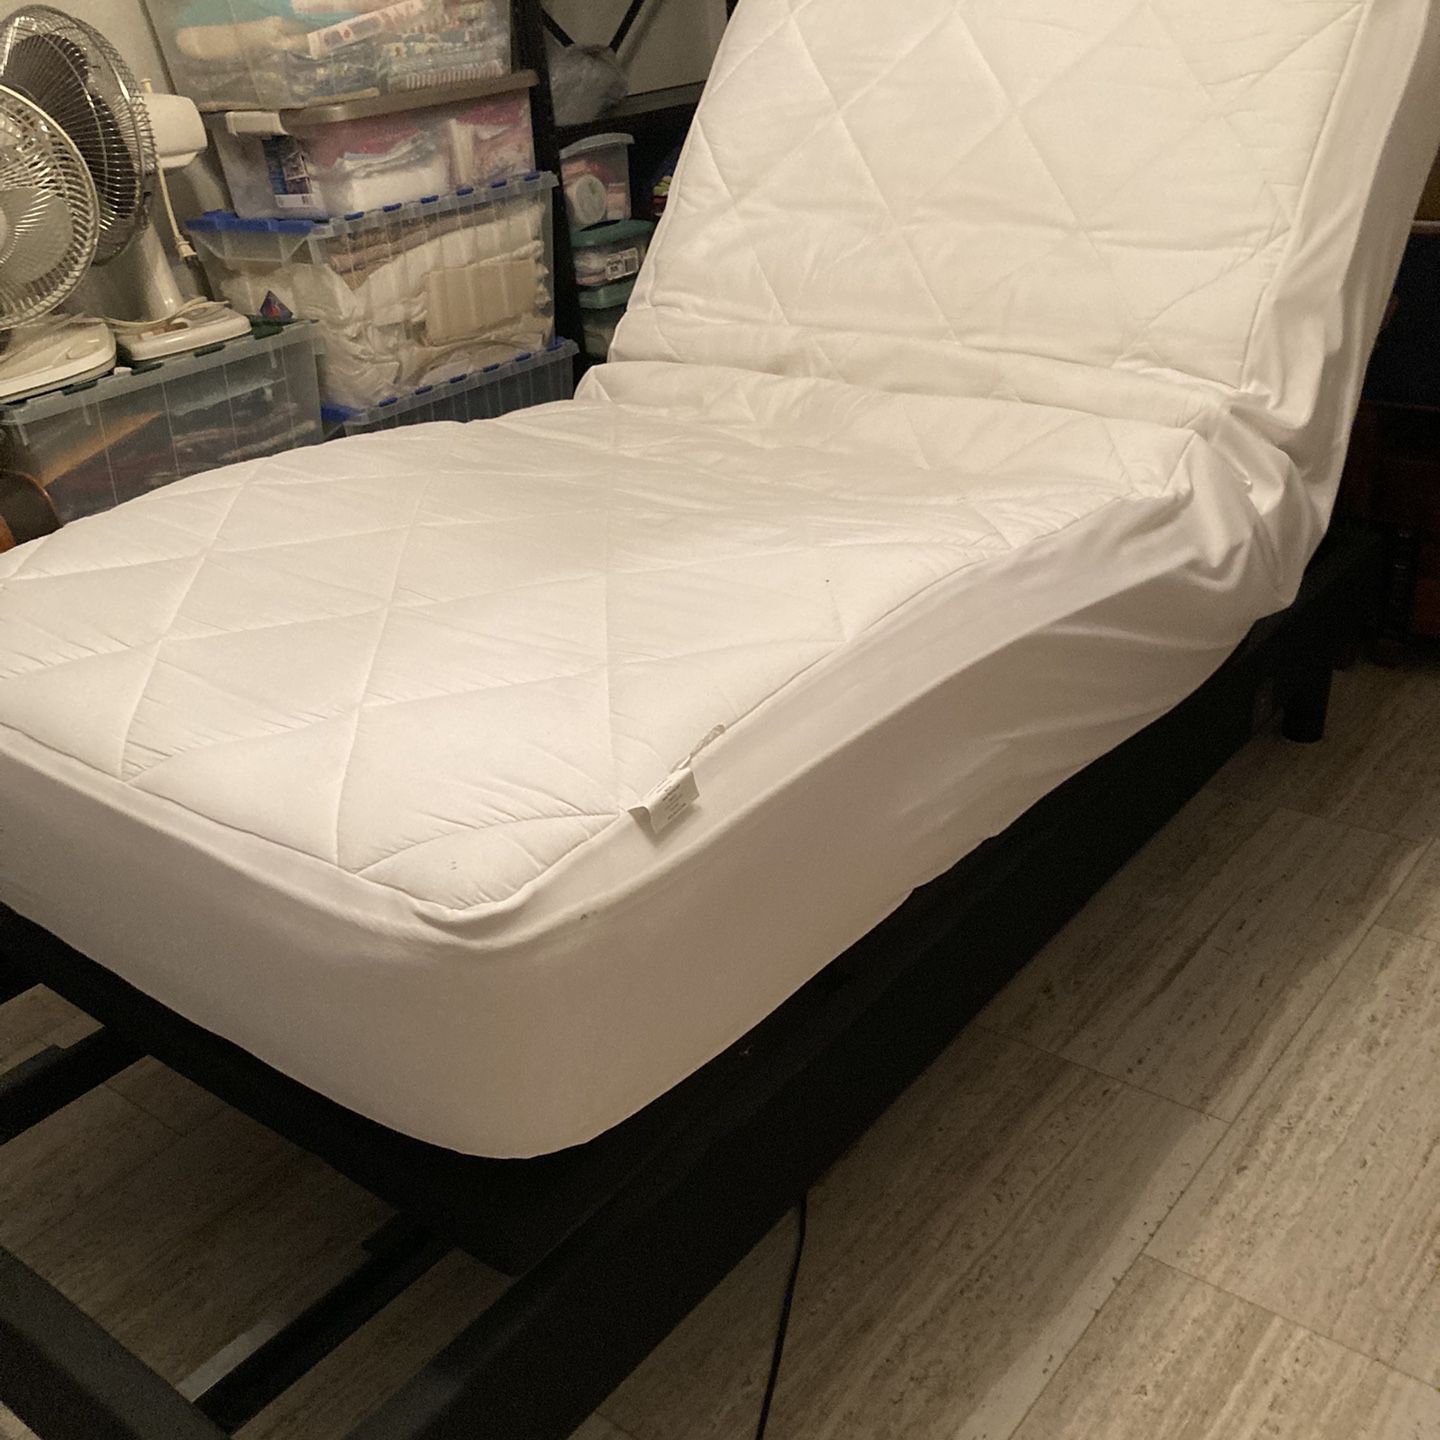 Adjustable Electric Bed